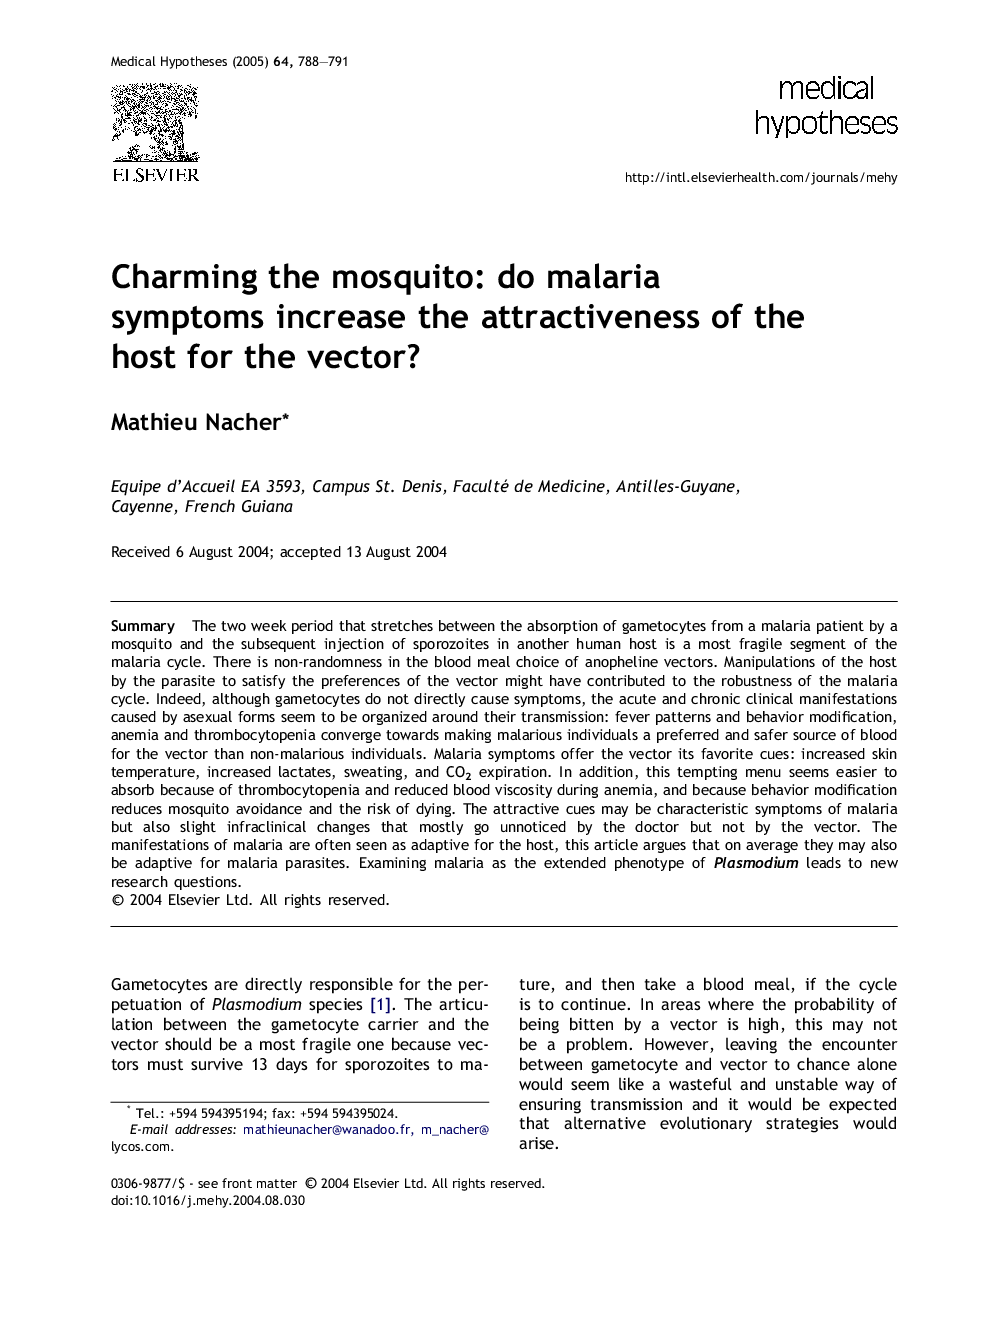 Charming the mosquito: do malaria symptoms increase the attractiveness of the host for the vector?